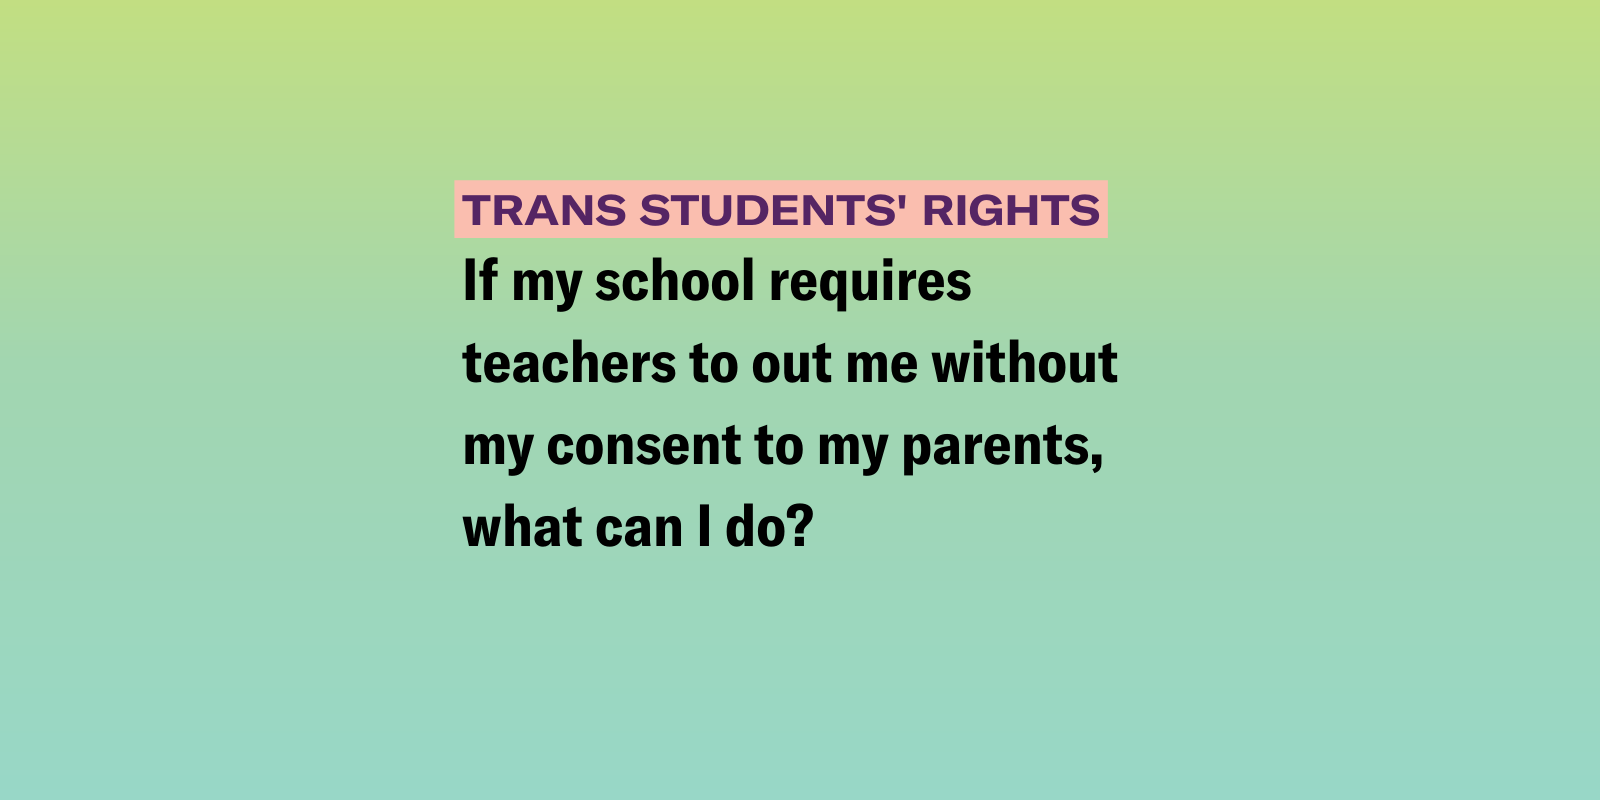 gradient background of pink and dark blue with the following text "If my school requires teachers to out me without my consent to my parents, what can I do?" 